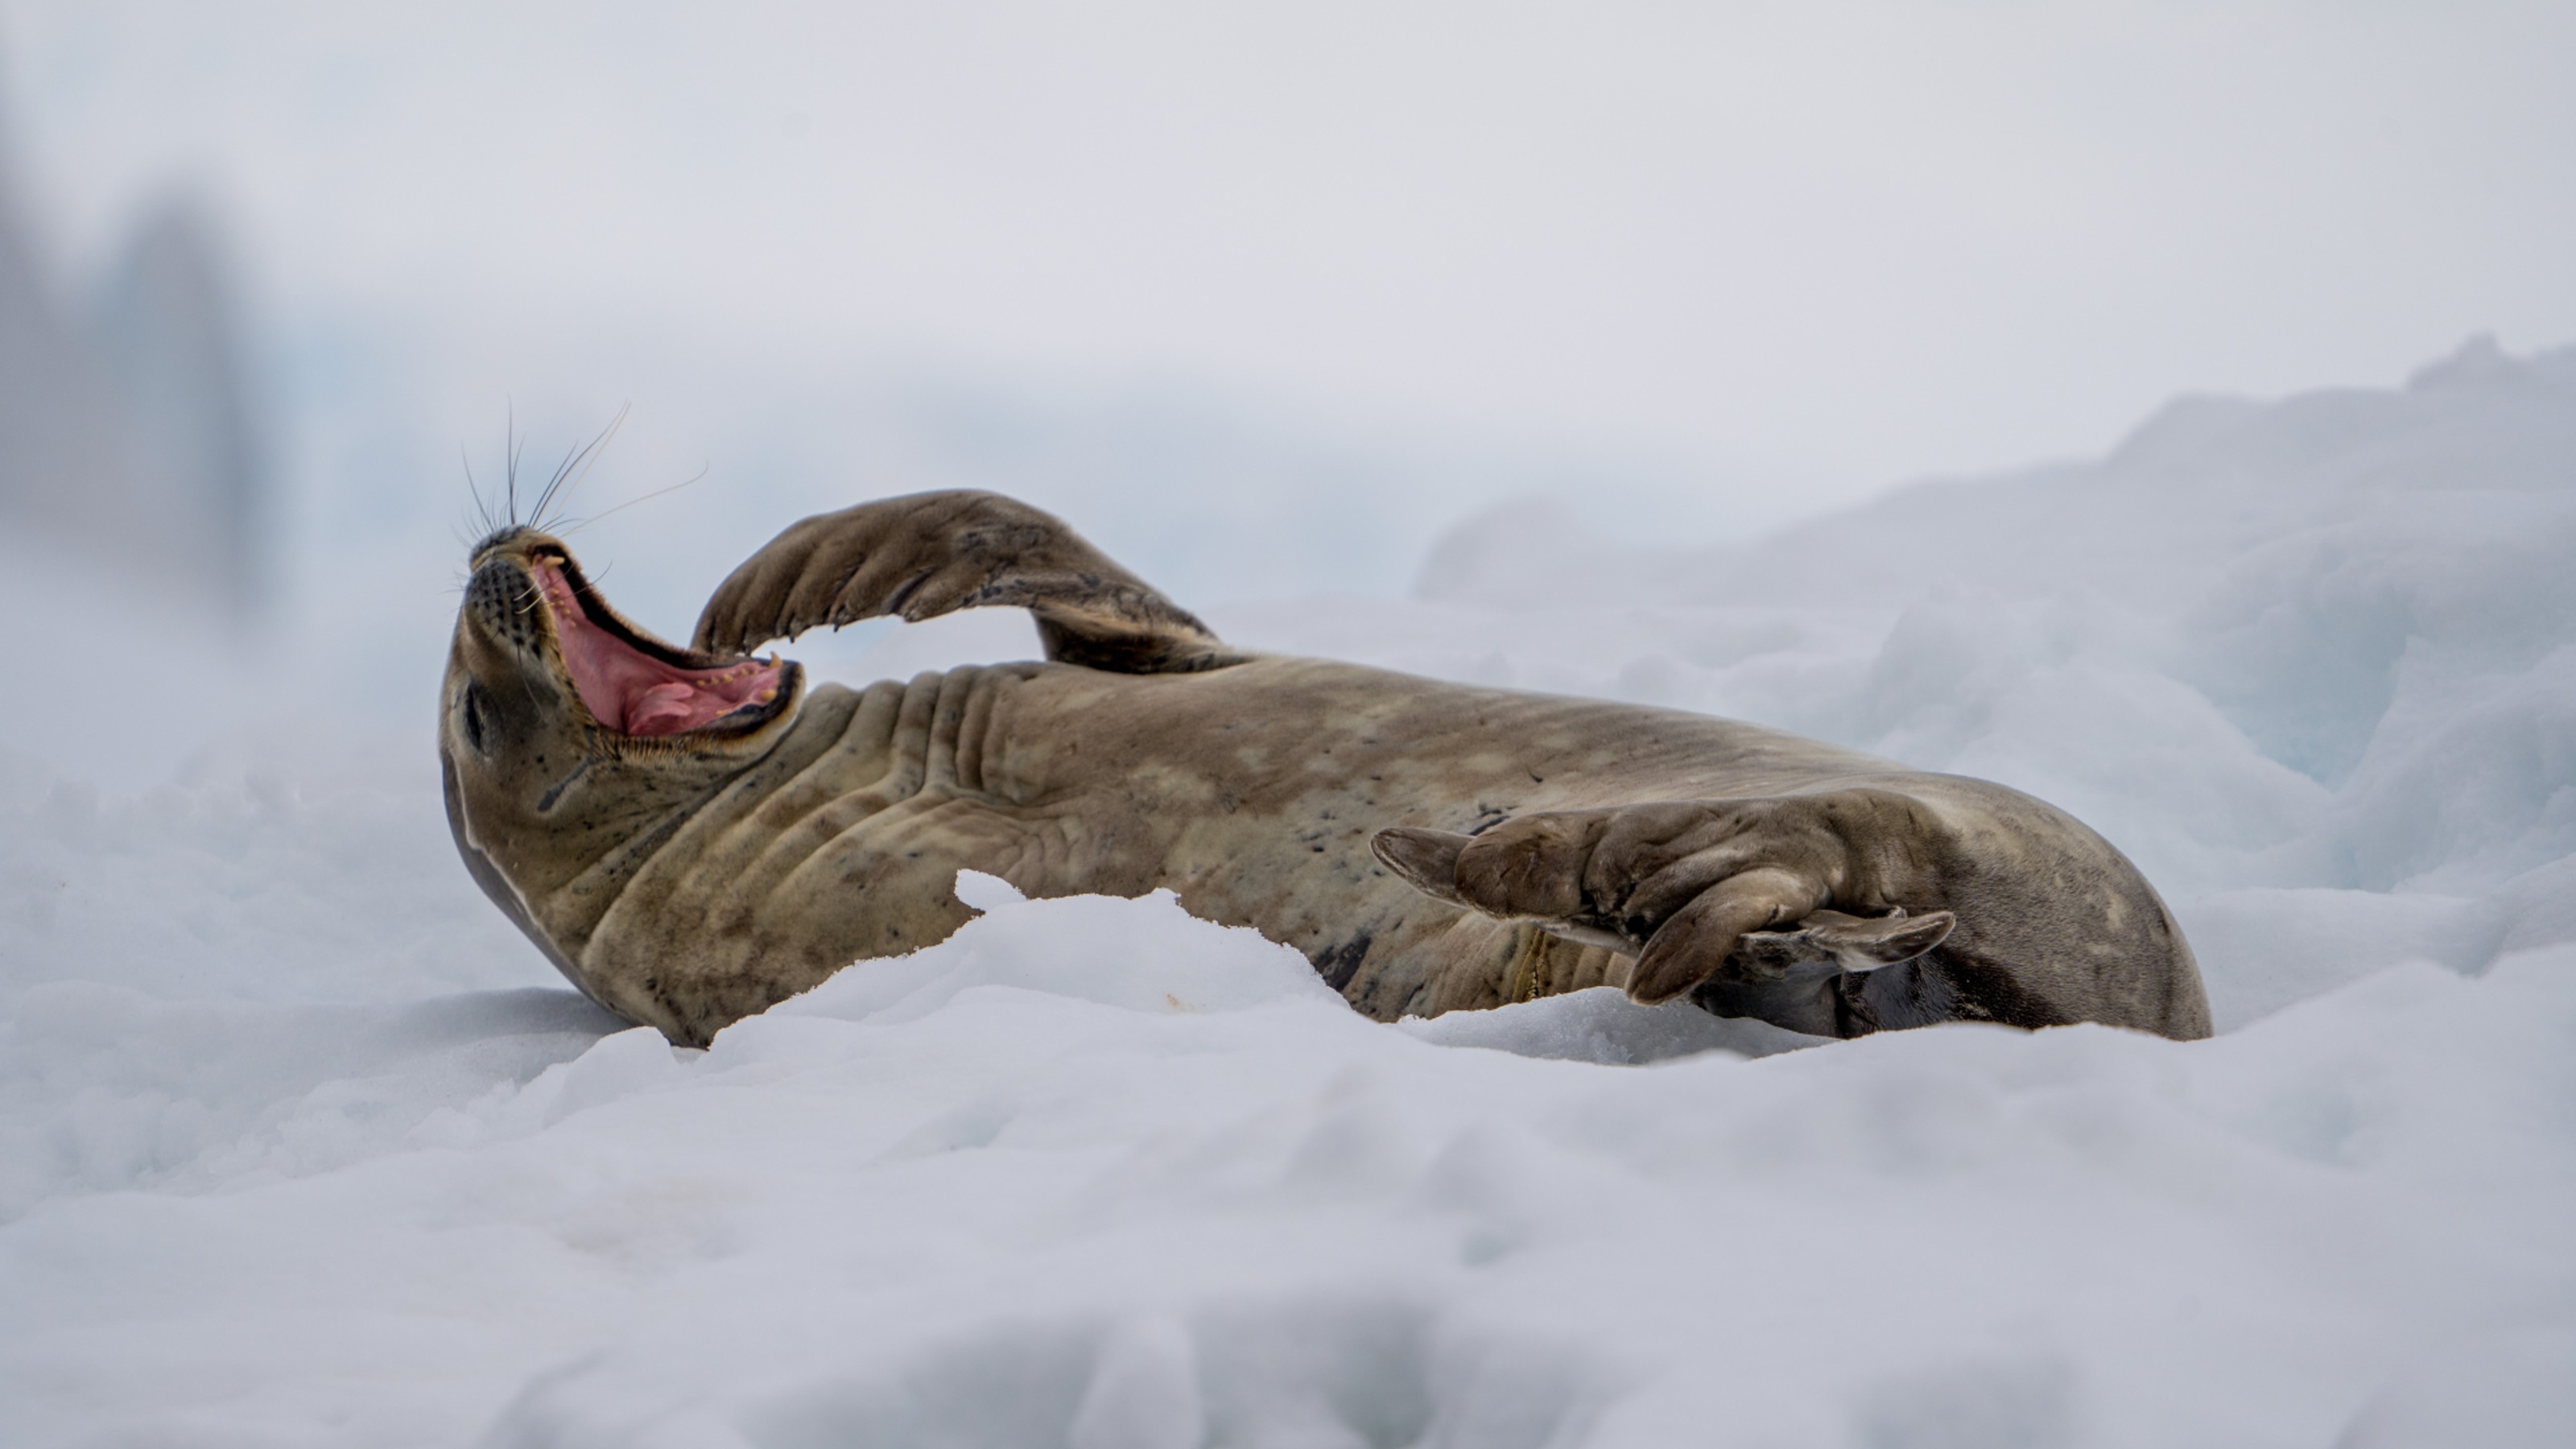 A seal lies on its back in the snow with its mouth open, appearing to yawn or stretch.